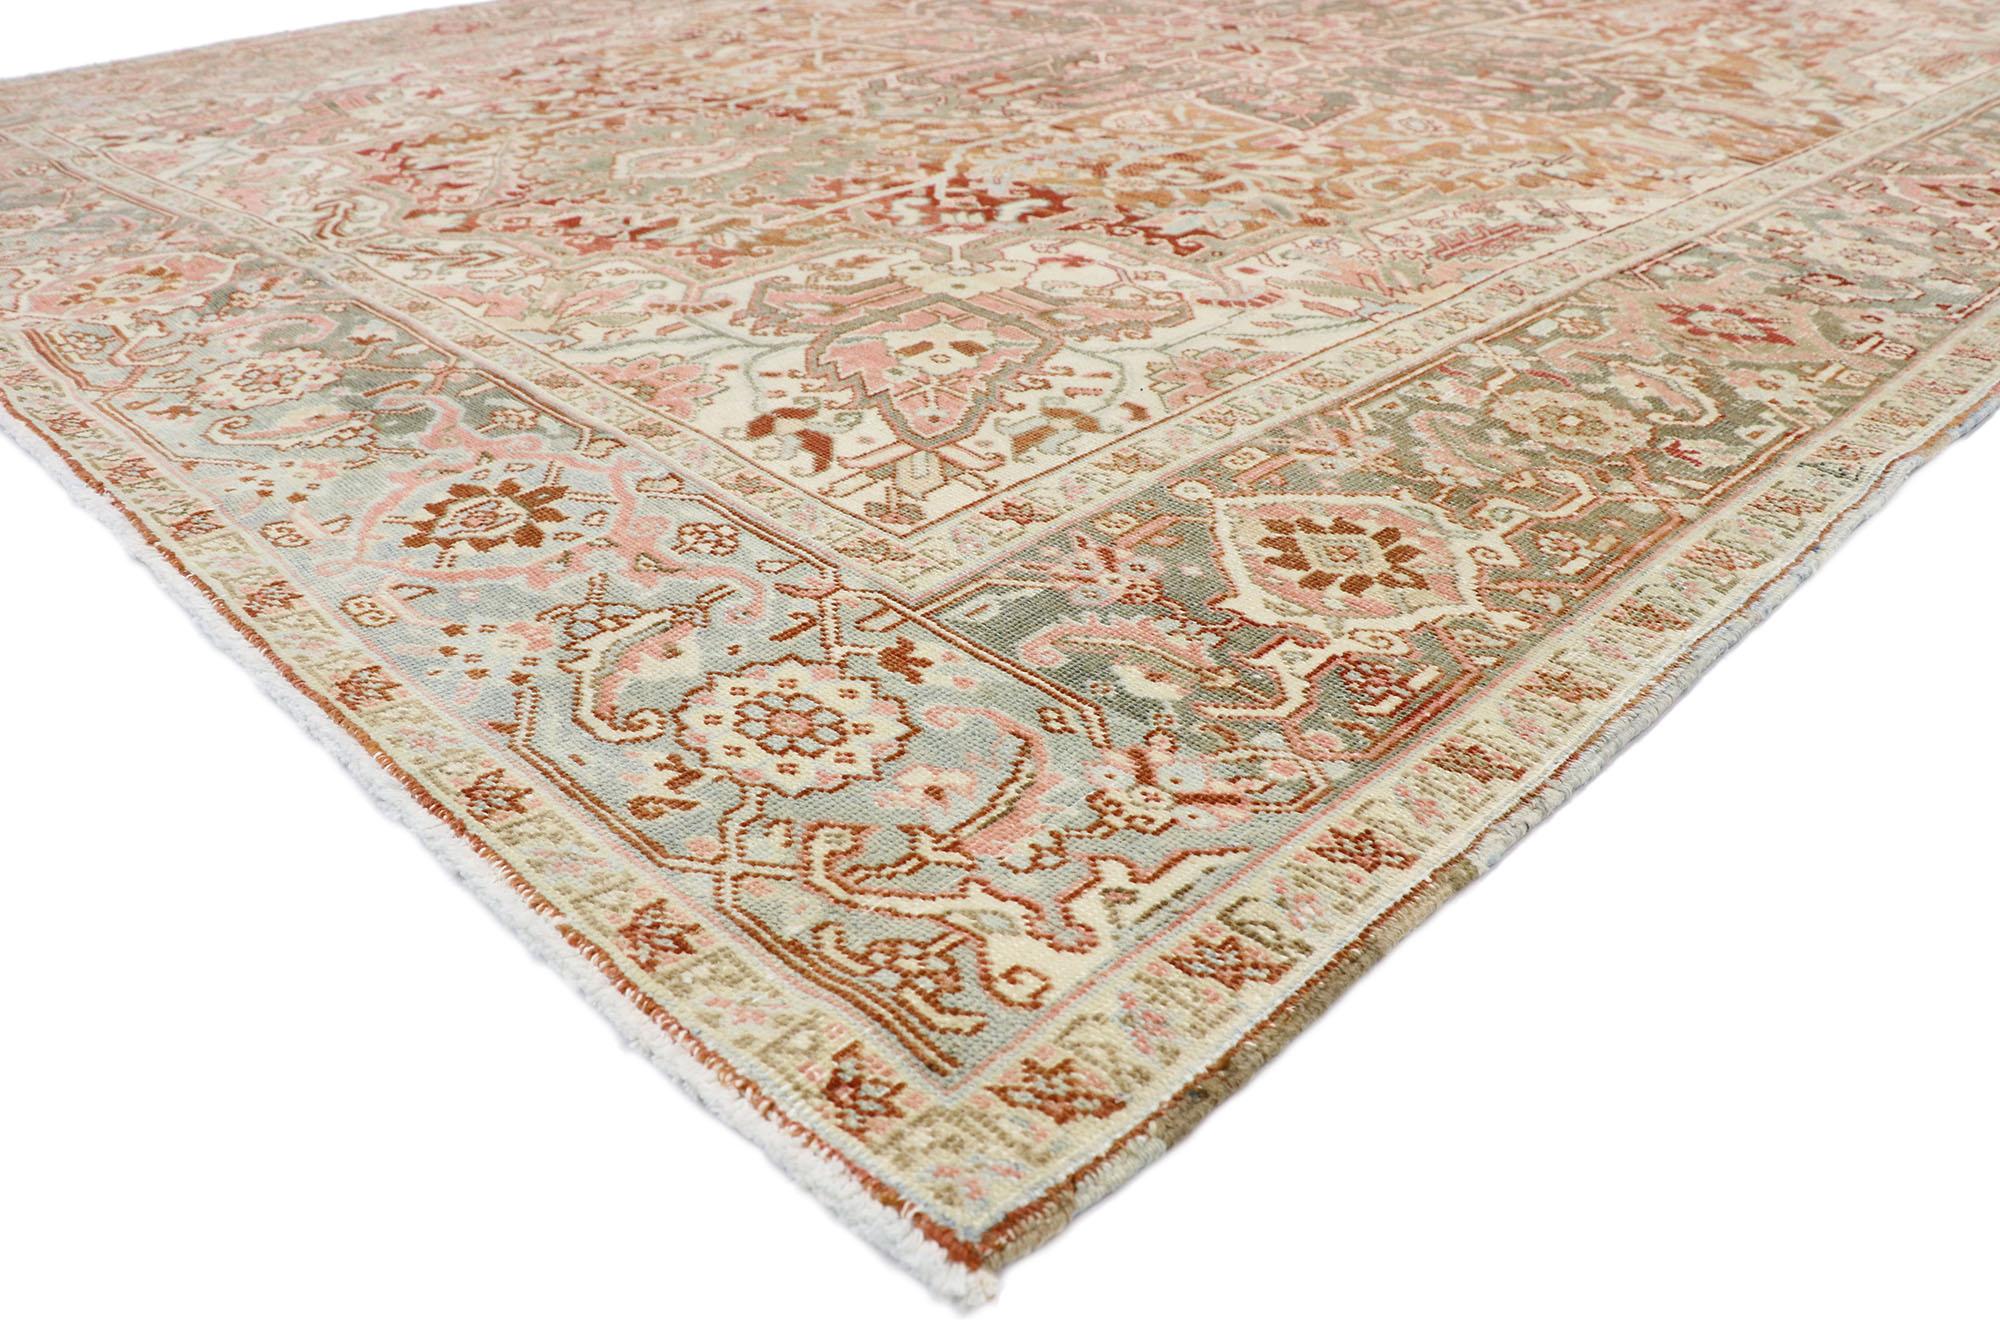 52667, distressed antique Persian Heriz Design rug with Rustic Arts & Crafts style. This hand knotted wool distressed antique Persian Heriz design rug features a large octofoil center medallion with flaming palmette pendants floating on an abrashed